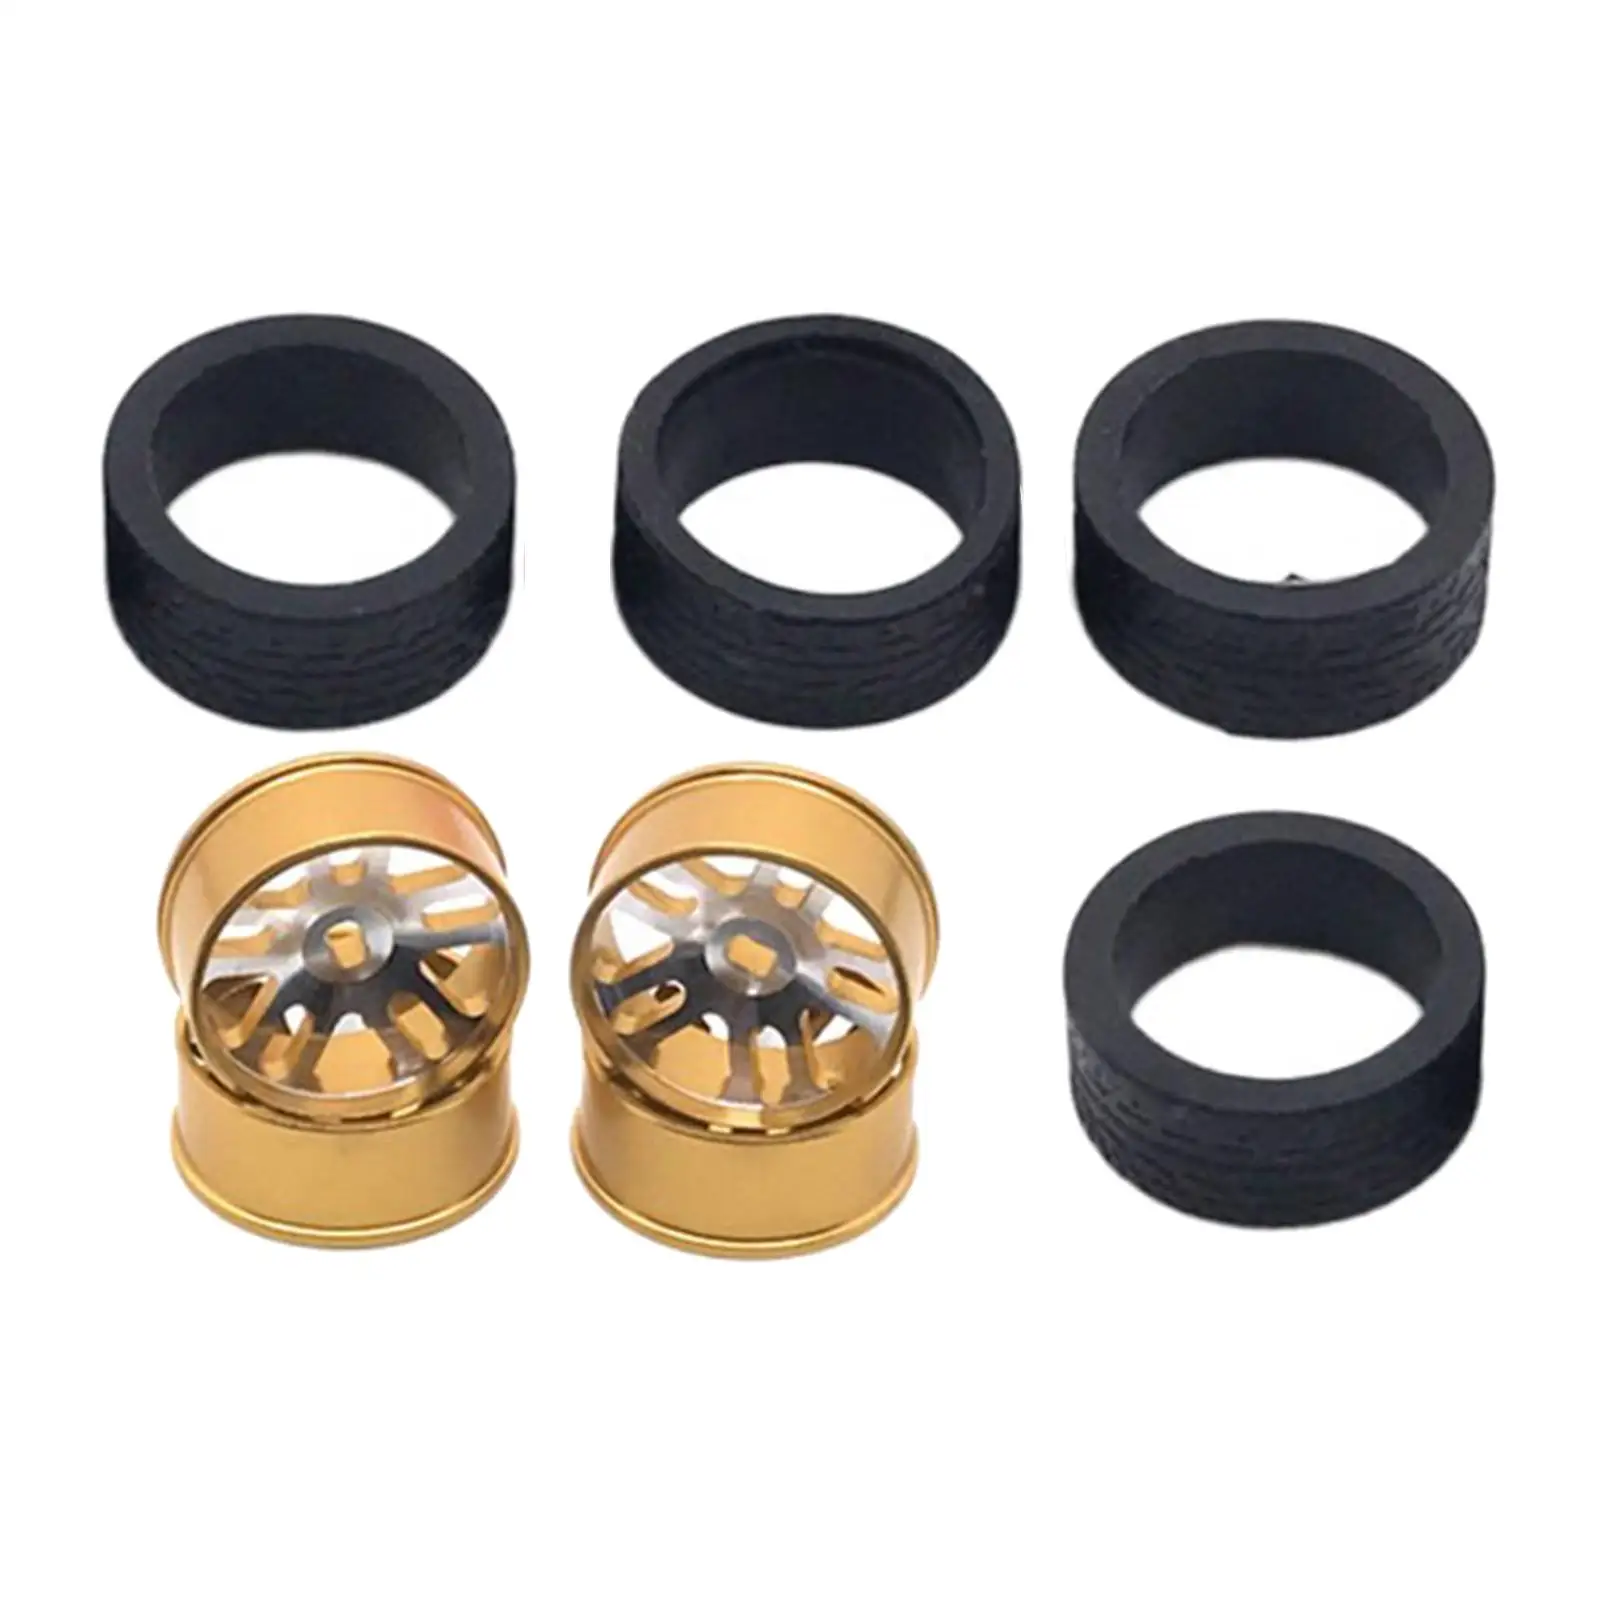 RC Car Tires Wheel Rims Upgrade Parts Spare Parts for Wltoys 284131 K999 RC